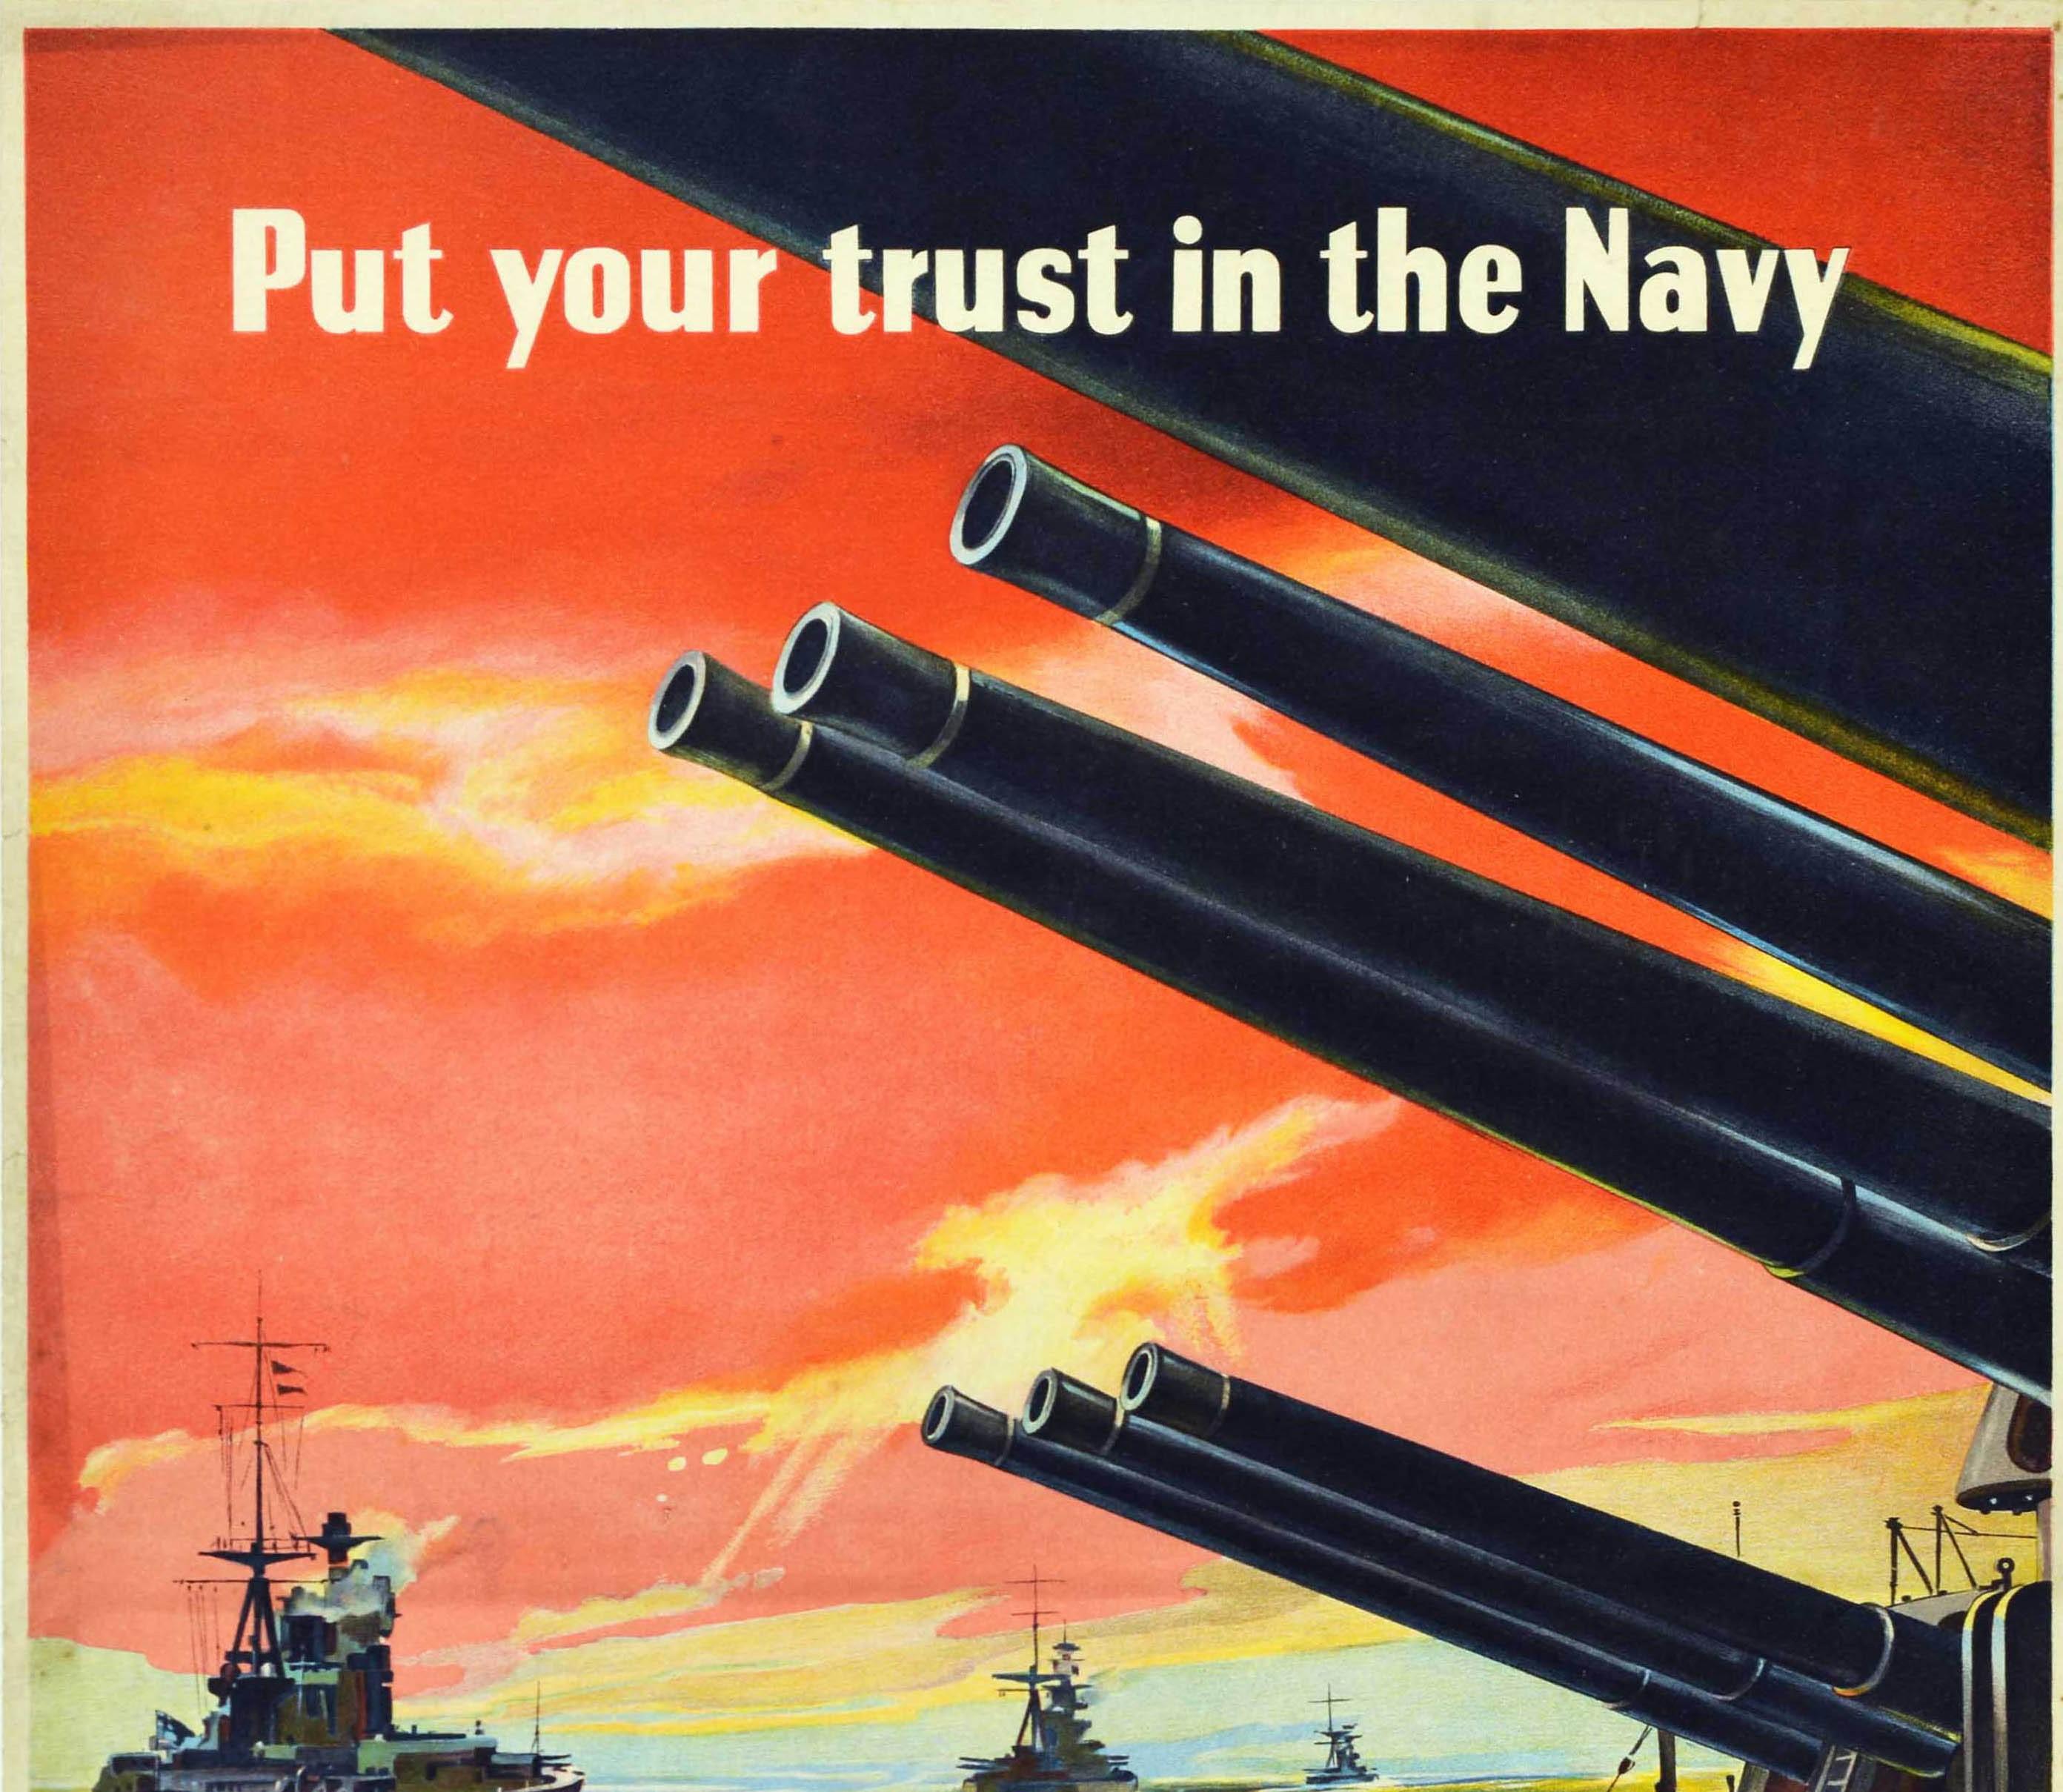 Original Vintage WWII Poster For Savings Certificates Royal Navy War Ship Design - Print by Unknown